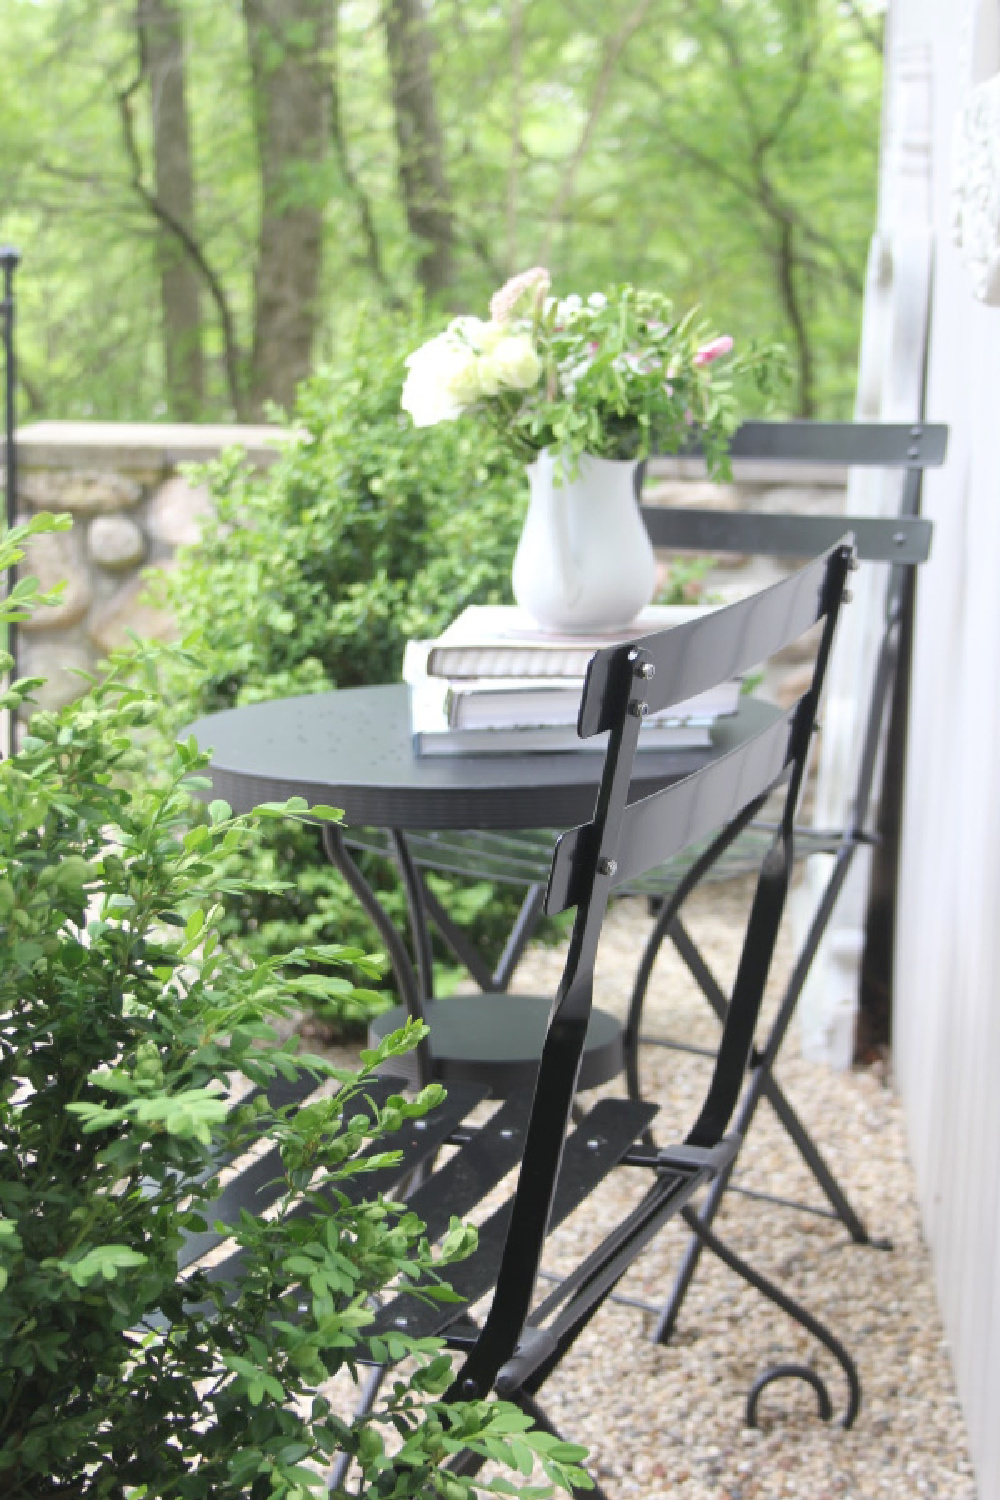 Hello Lovely Parisian Café Chair - perfect for gardens, patio, and small outdoor spaces or balconies. Parisian romance and folding bistro chairs tuck away for storage. #hellolovelystudio #frenchmodern #frenchcountry #Frenchbistro #outdoordecor #patioset #smallpatios #parisianchairs #bistrochair